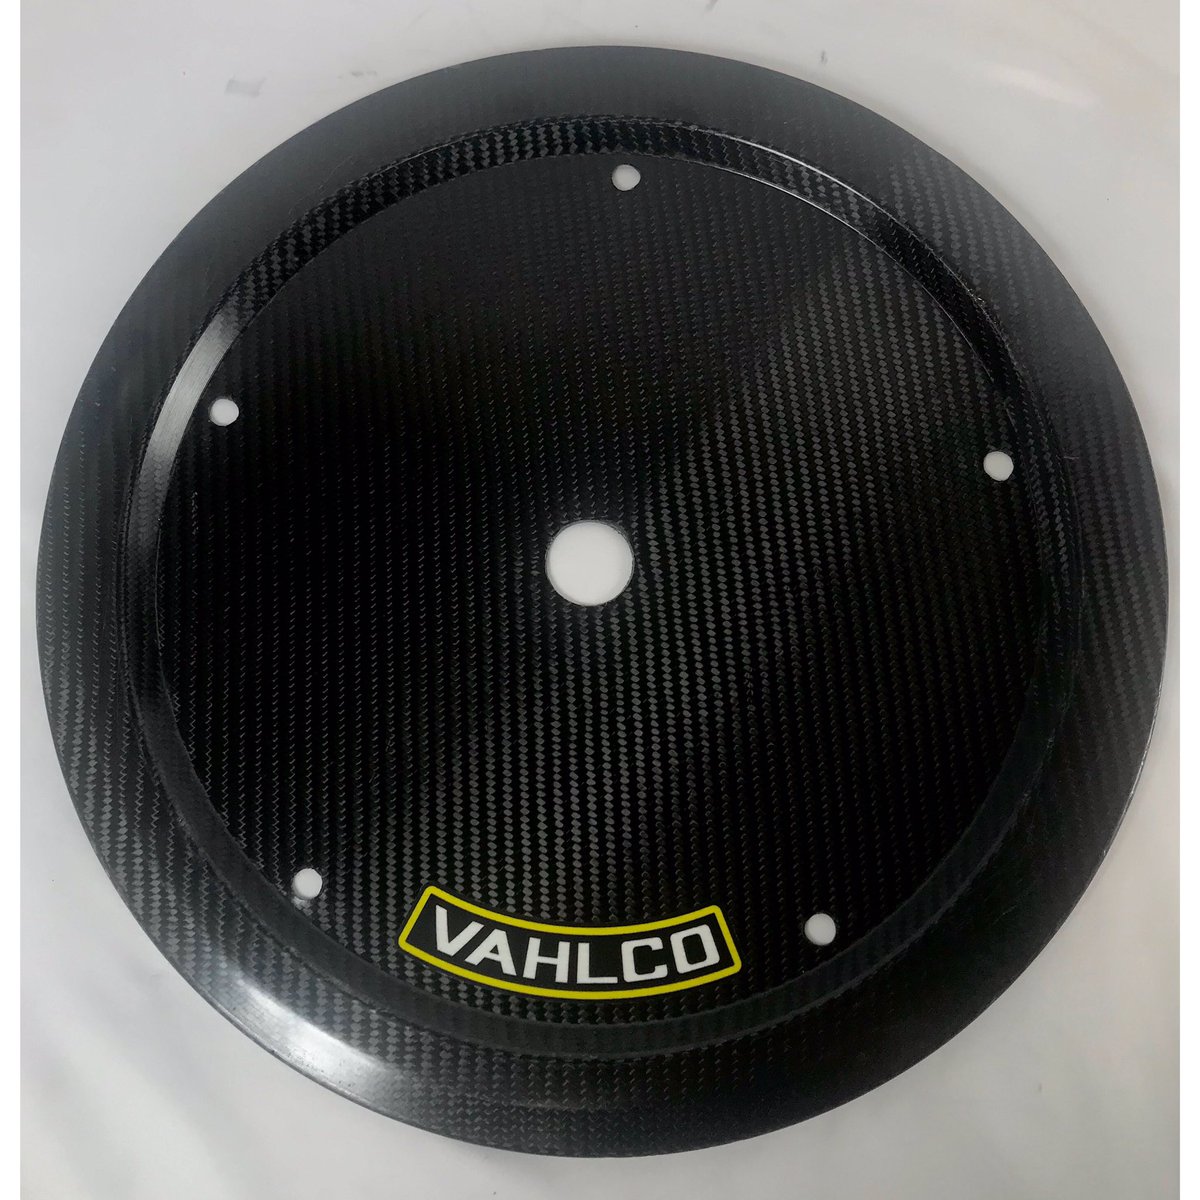 NEW! Carbon Fiber wheel covers. Only 0.5 lbs😱 Call us today to get your new light weight cover!